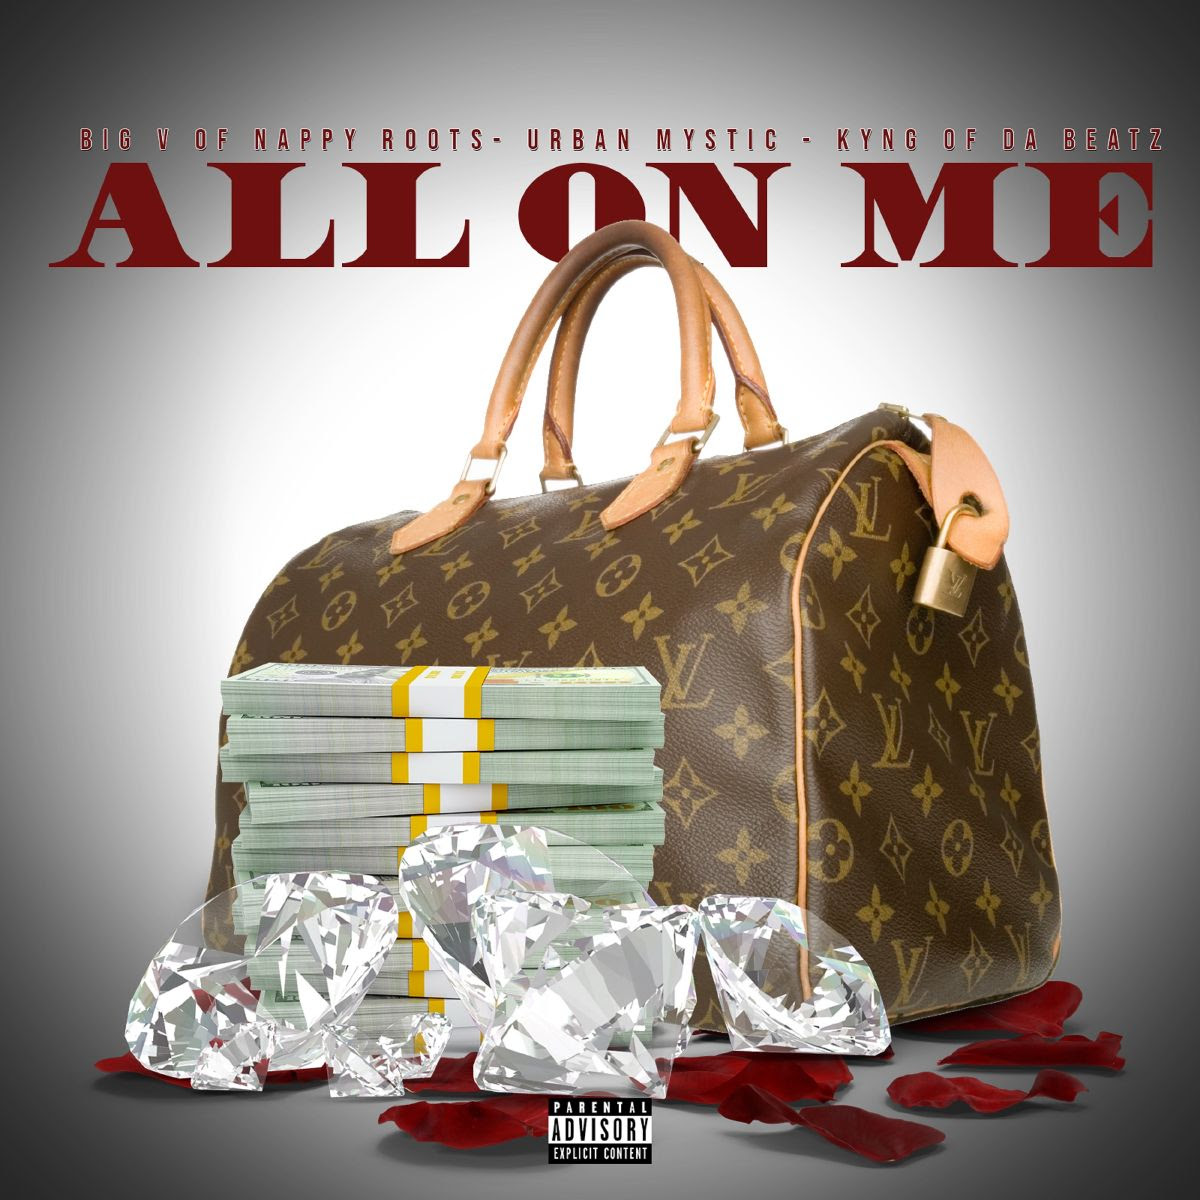 Big V of Nappy Roots Taps Urban Mystic For His First Ode To Romance “All On Me”